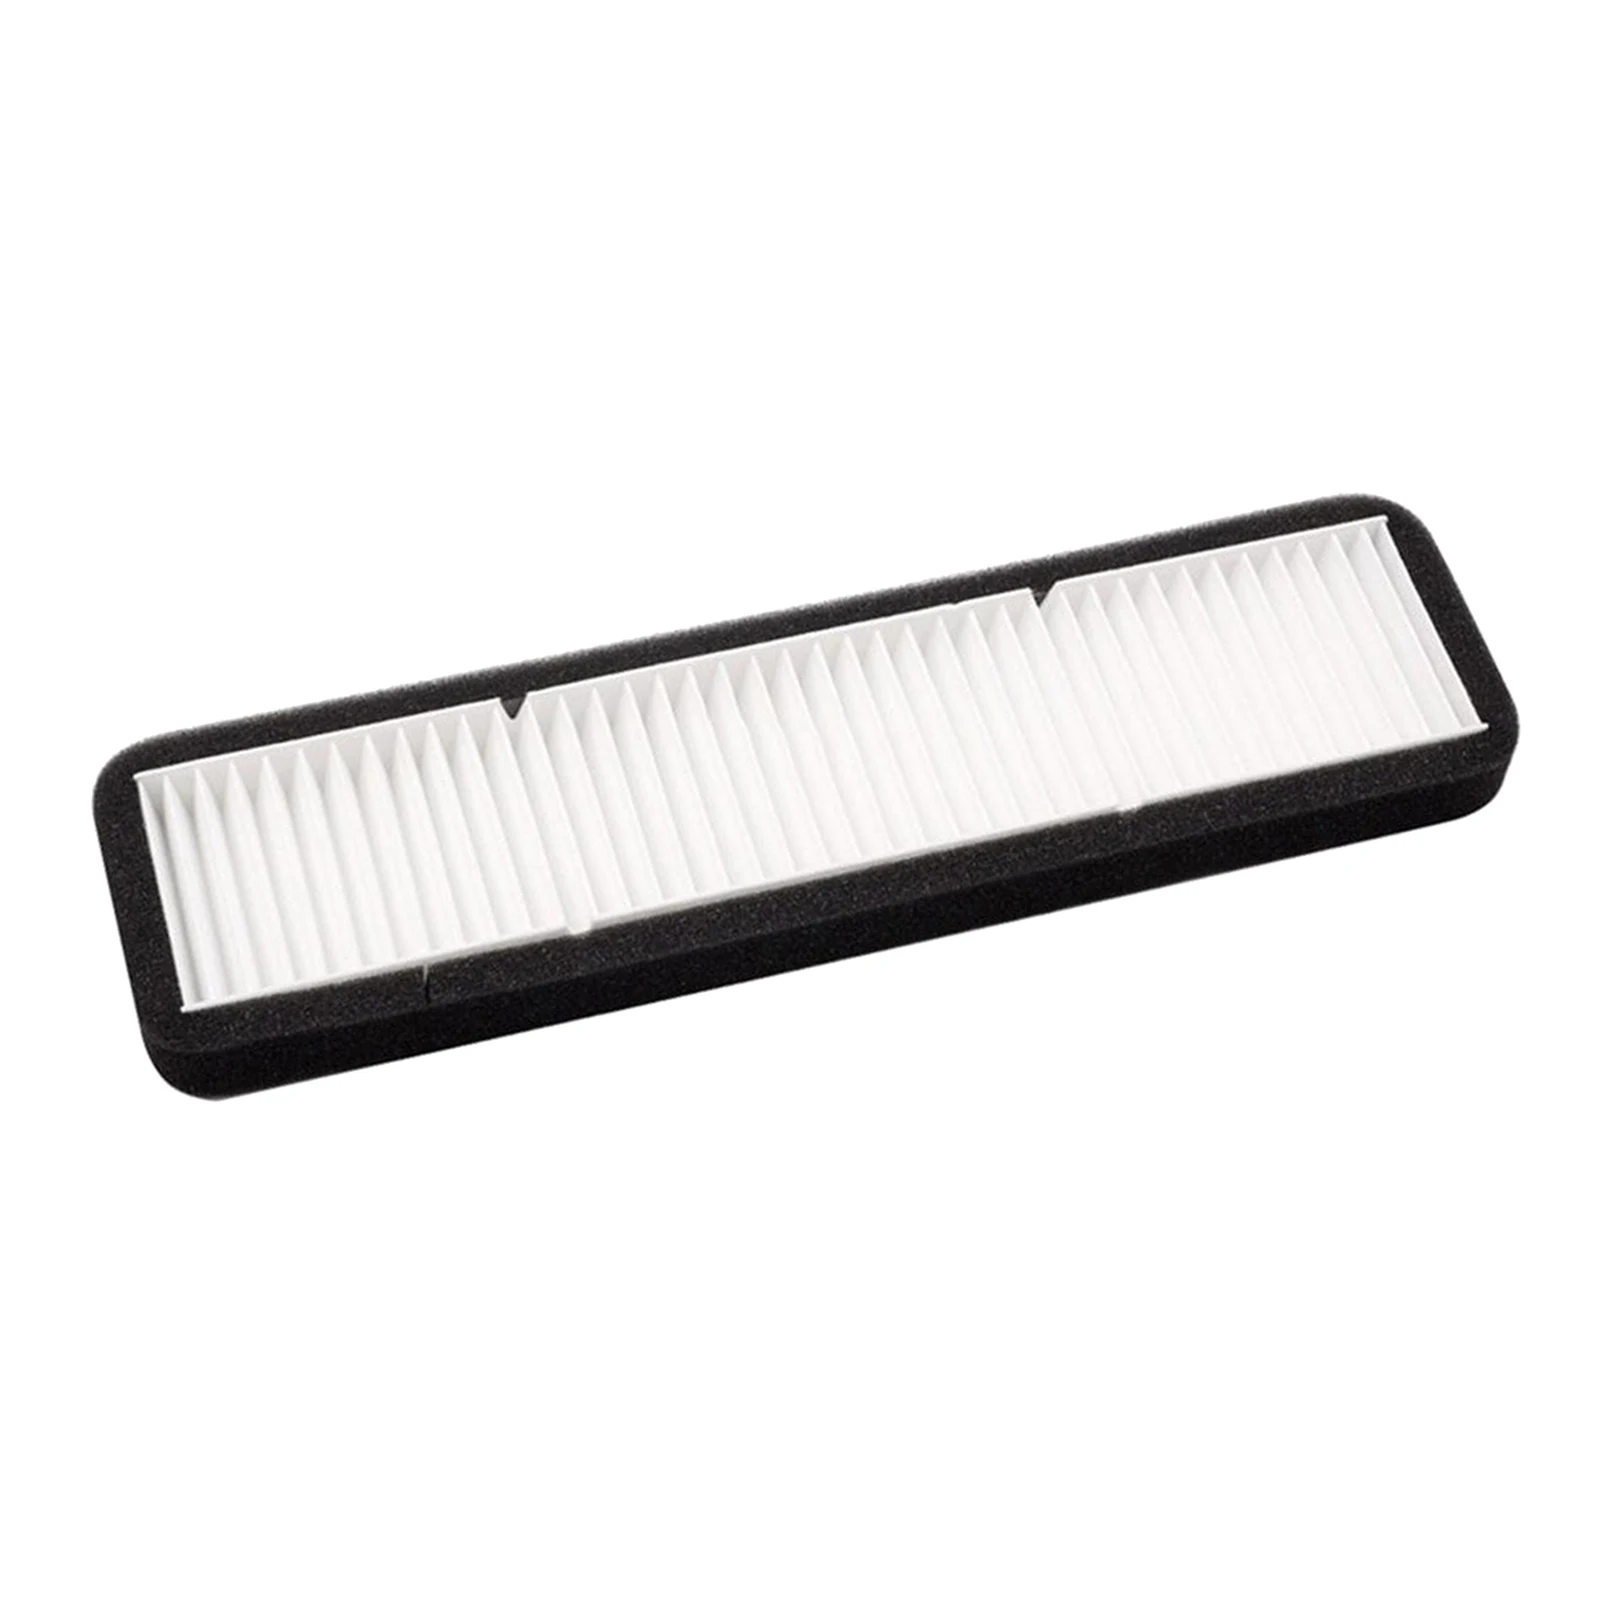 New Air Conditioning Filter Effective Blocking PM2.5 For Tesla Model 3 Y